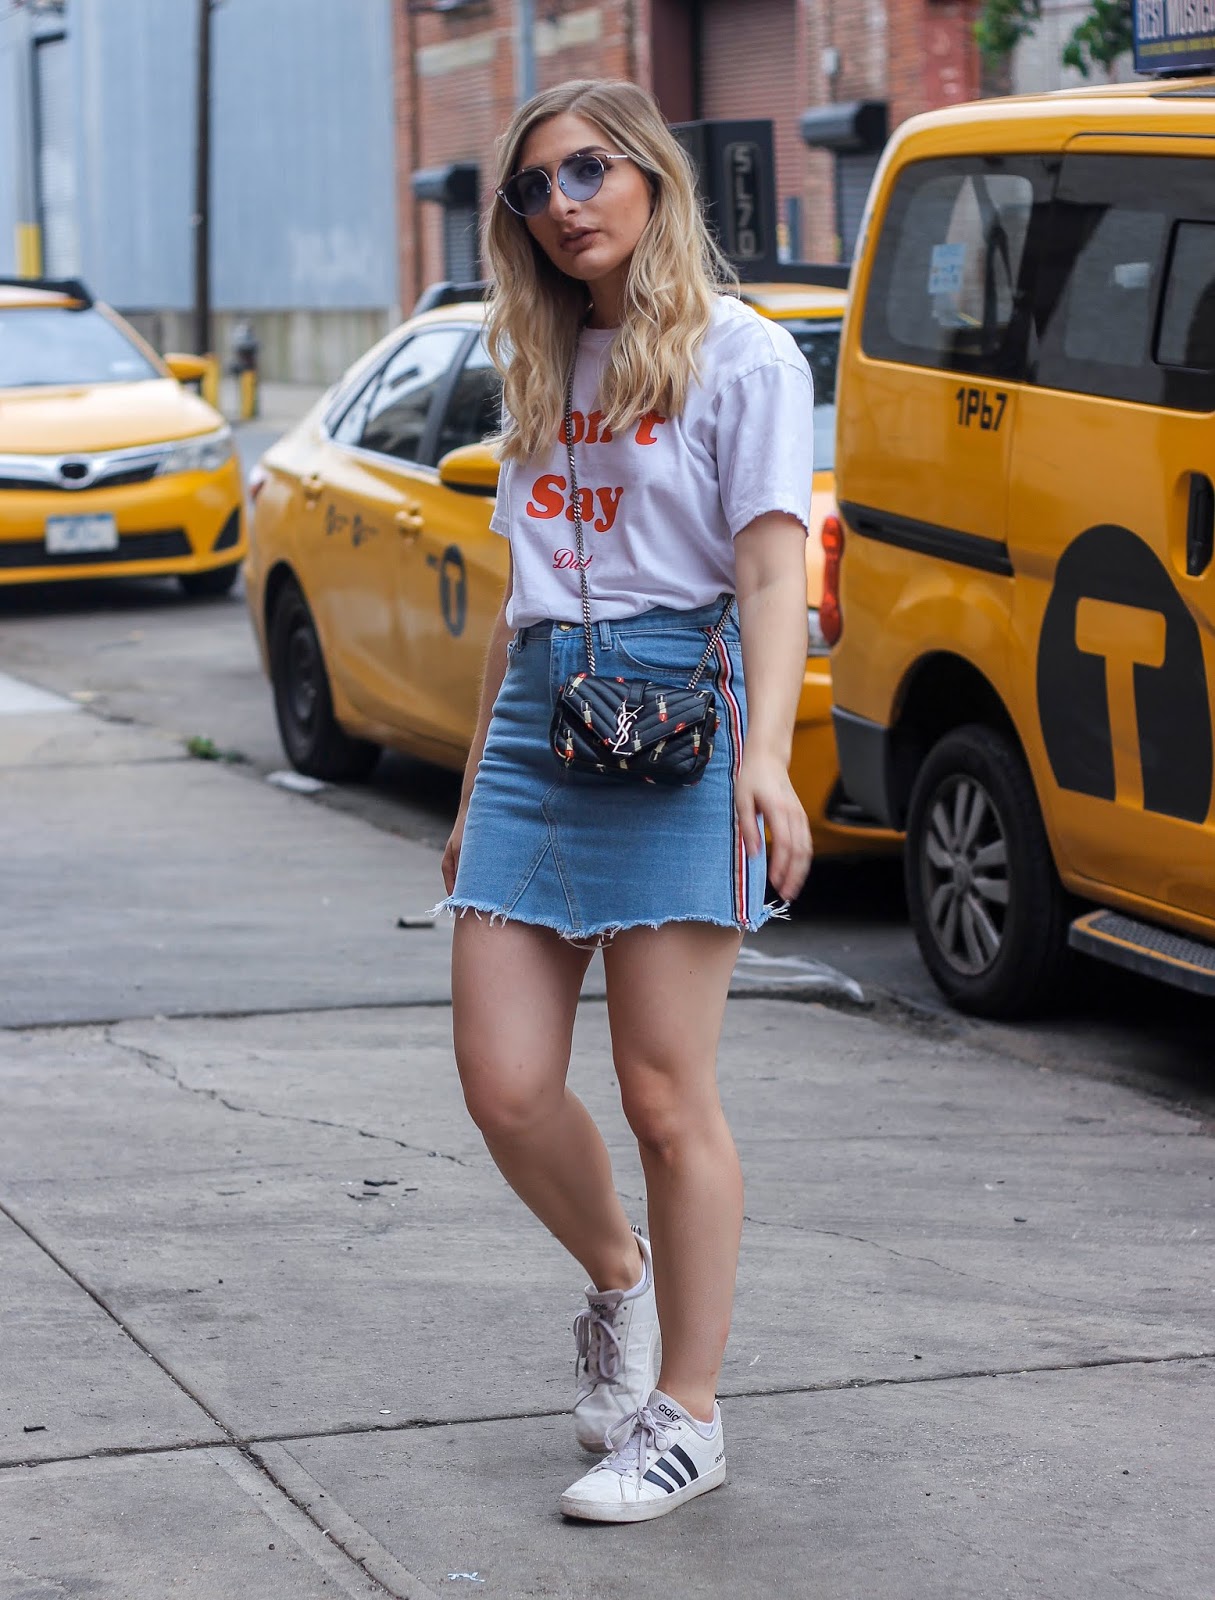 A New York Minute — life according to francesca